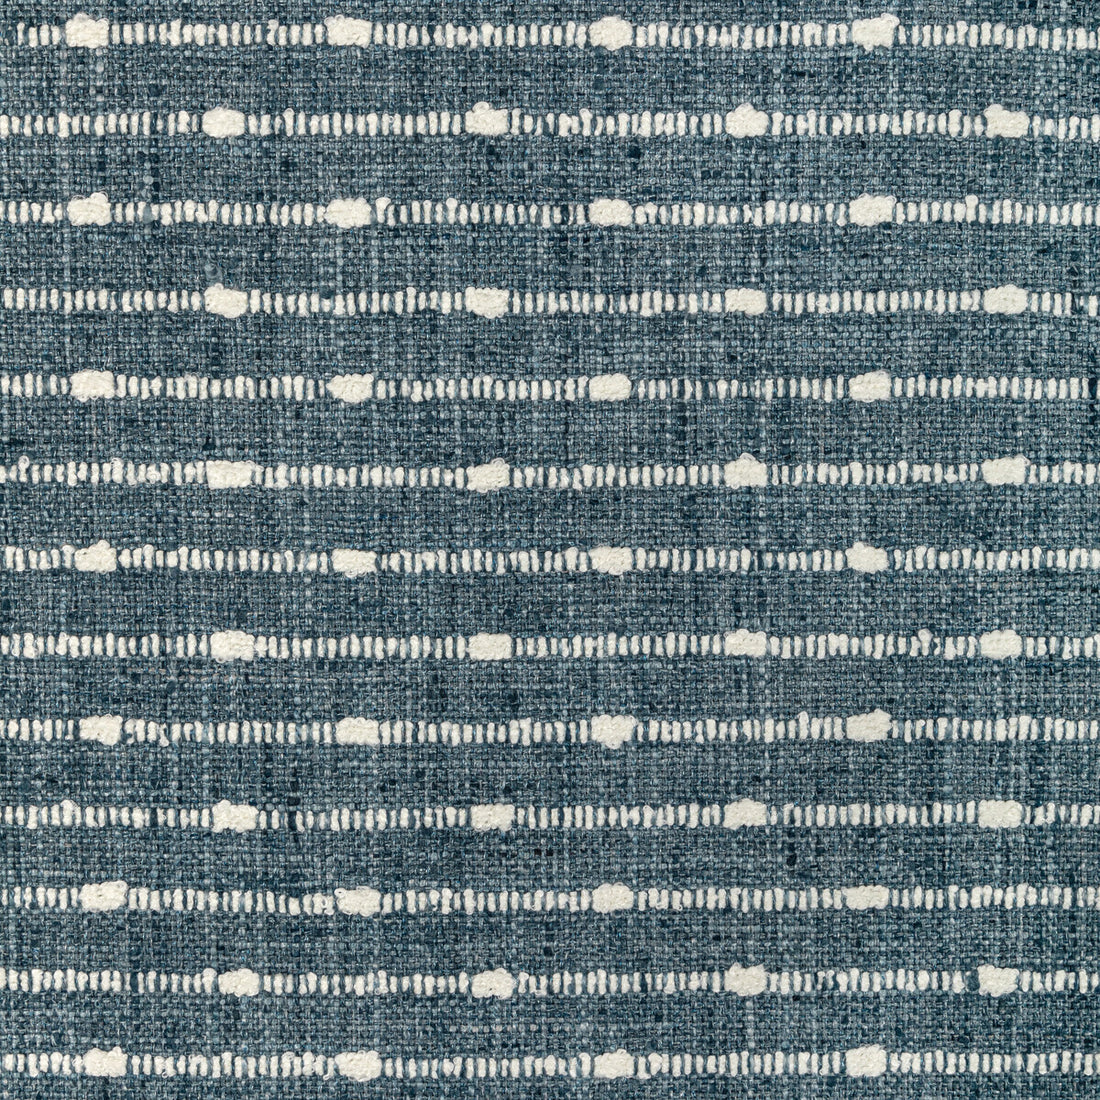 Kravet Basics fabric in 36528-5 color - pattern 36528.5.0 - by Kravet Basics in the Bungalow Chic II collection